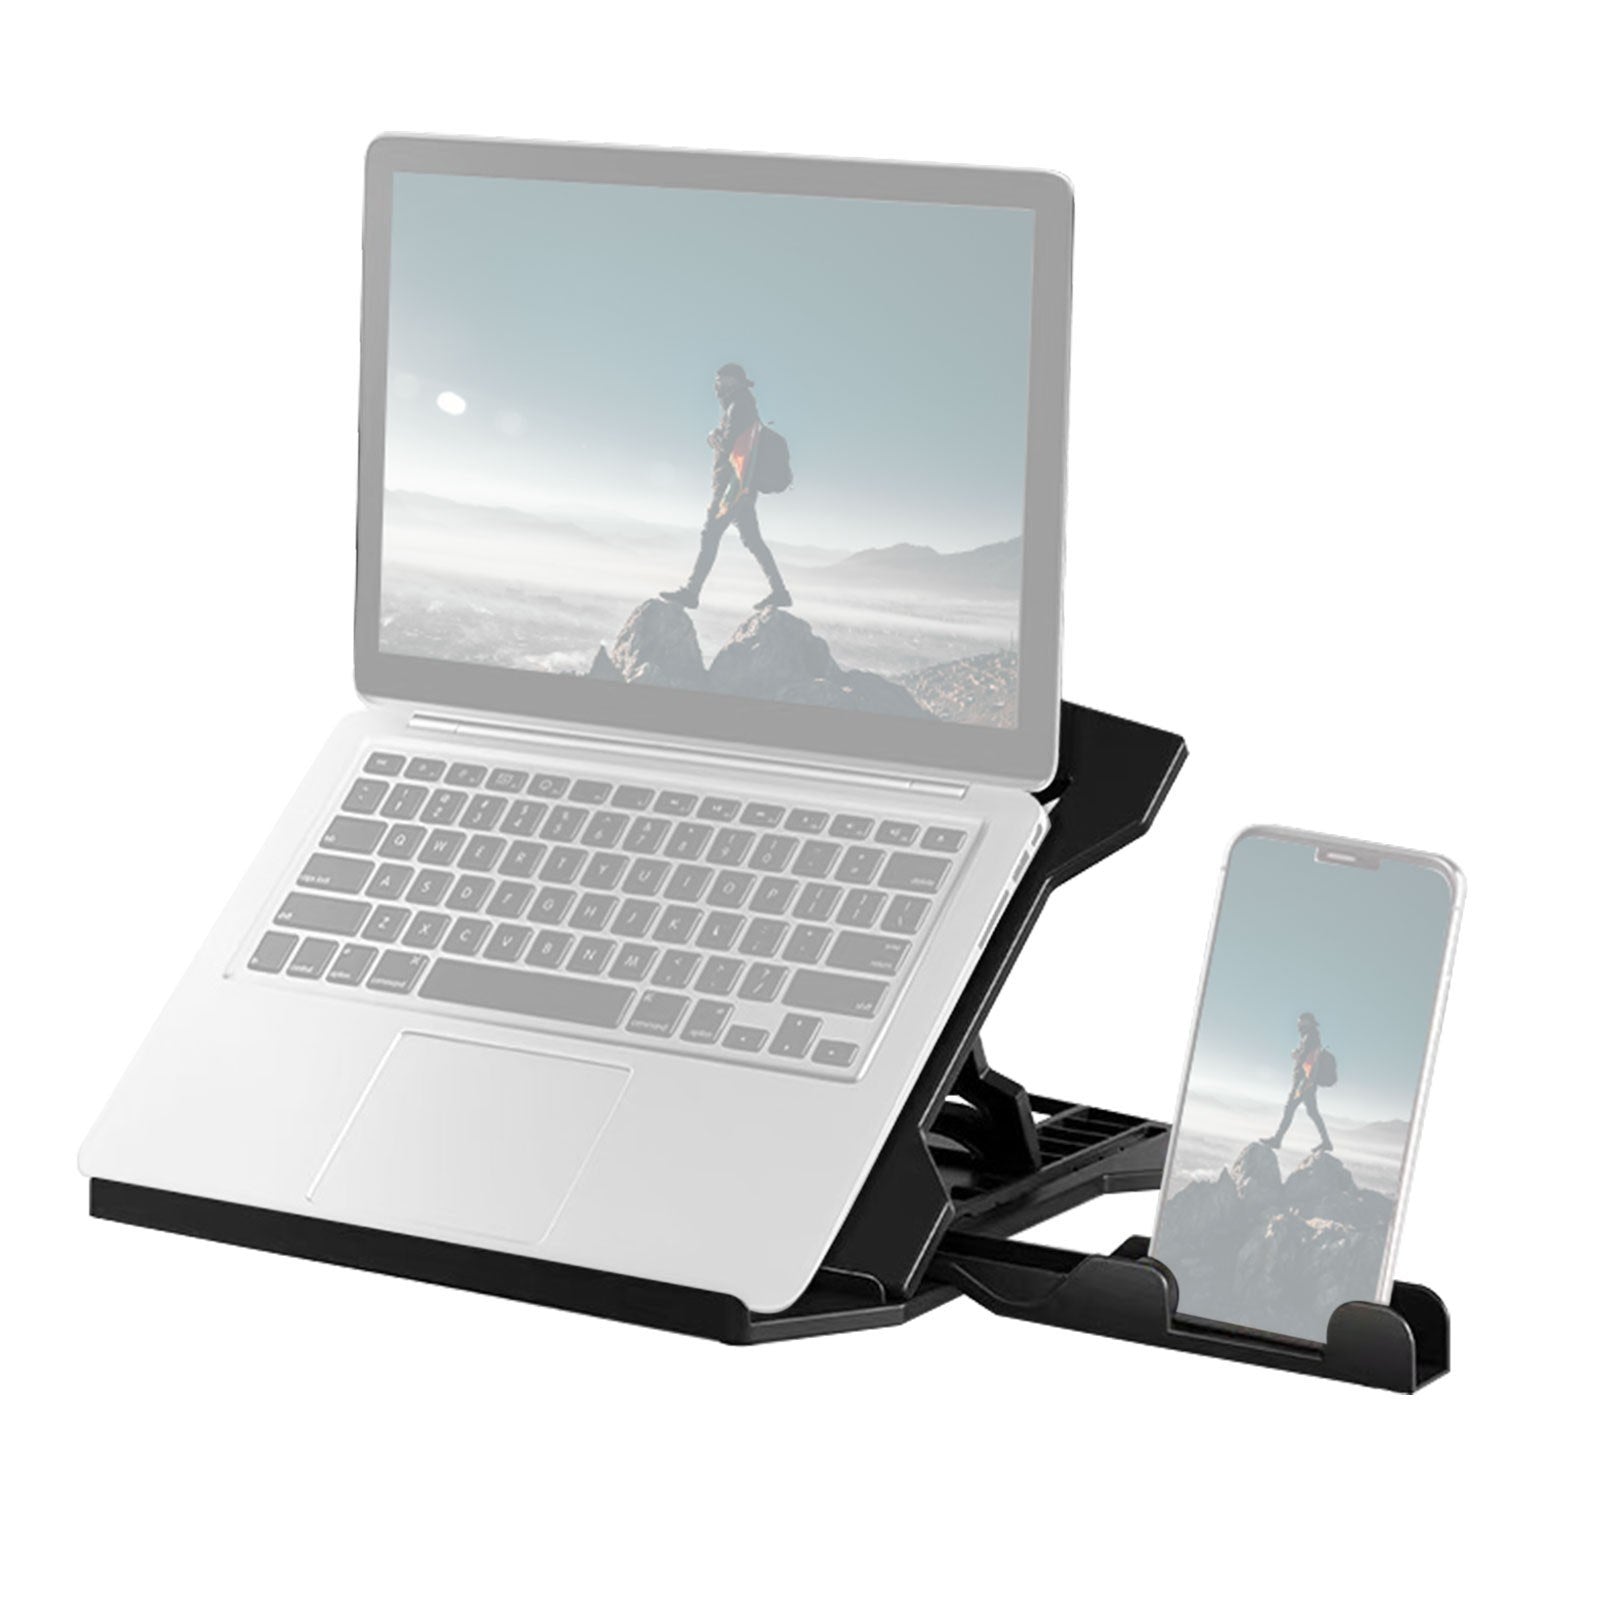 Portable Foldable Laptop Riser Stand Laptop Desktop Holder with Height Adjustment Ergonomic Computer Notebook Stand Bracket for Laptop Tablet within 10-15.6 Inches - Black/Style 1